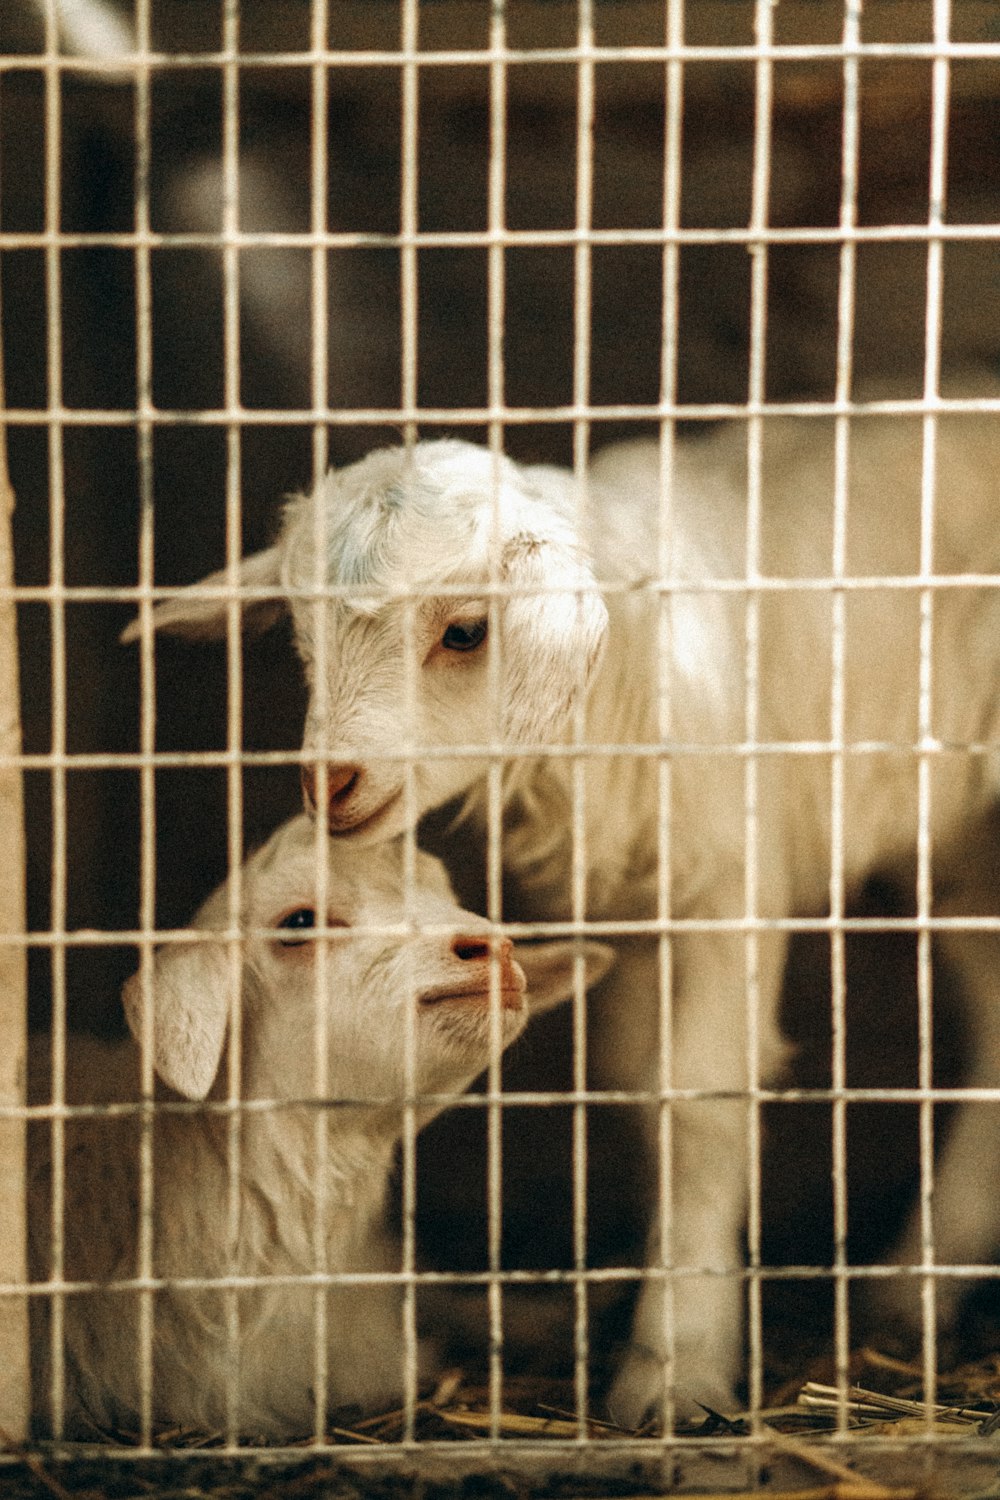 white goat in cage during daytime